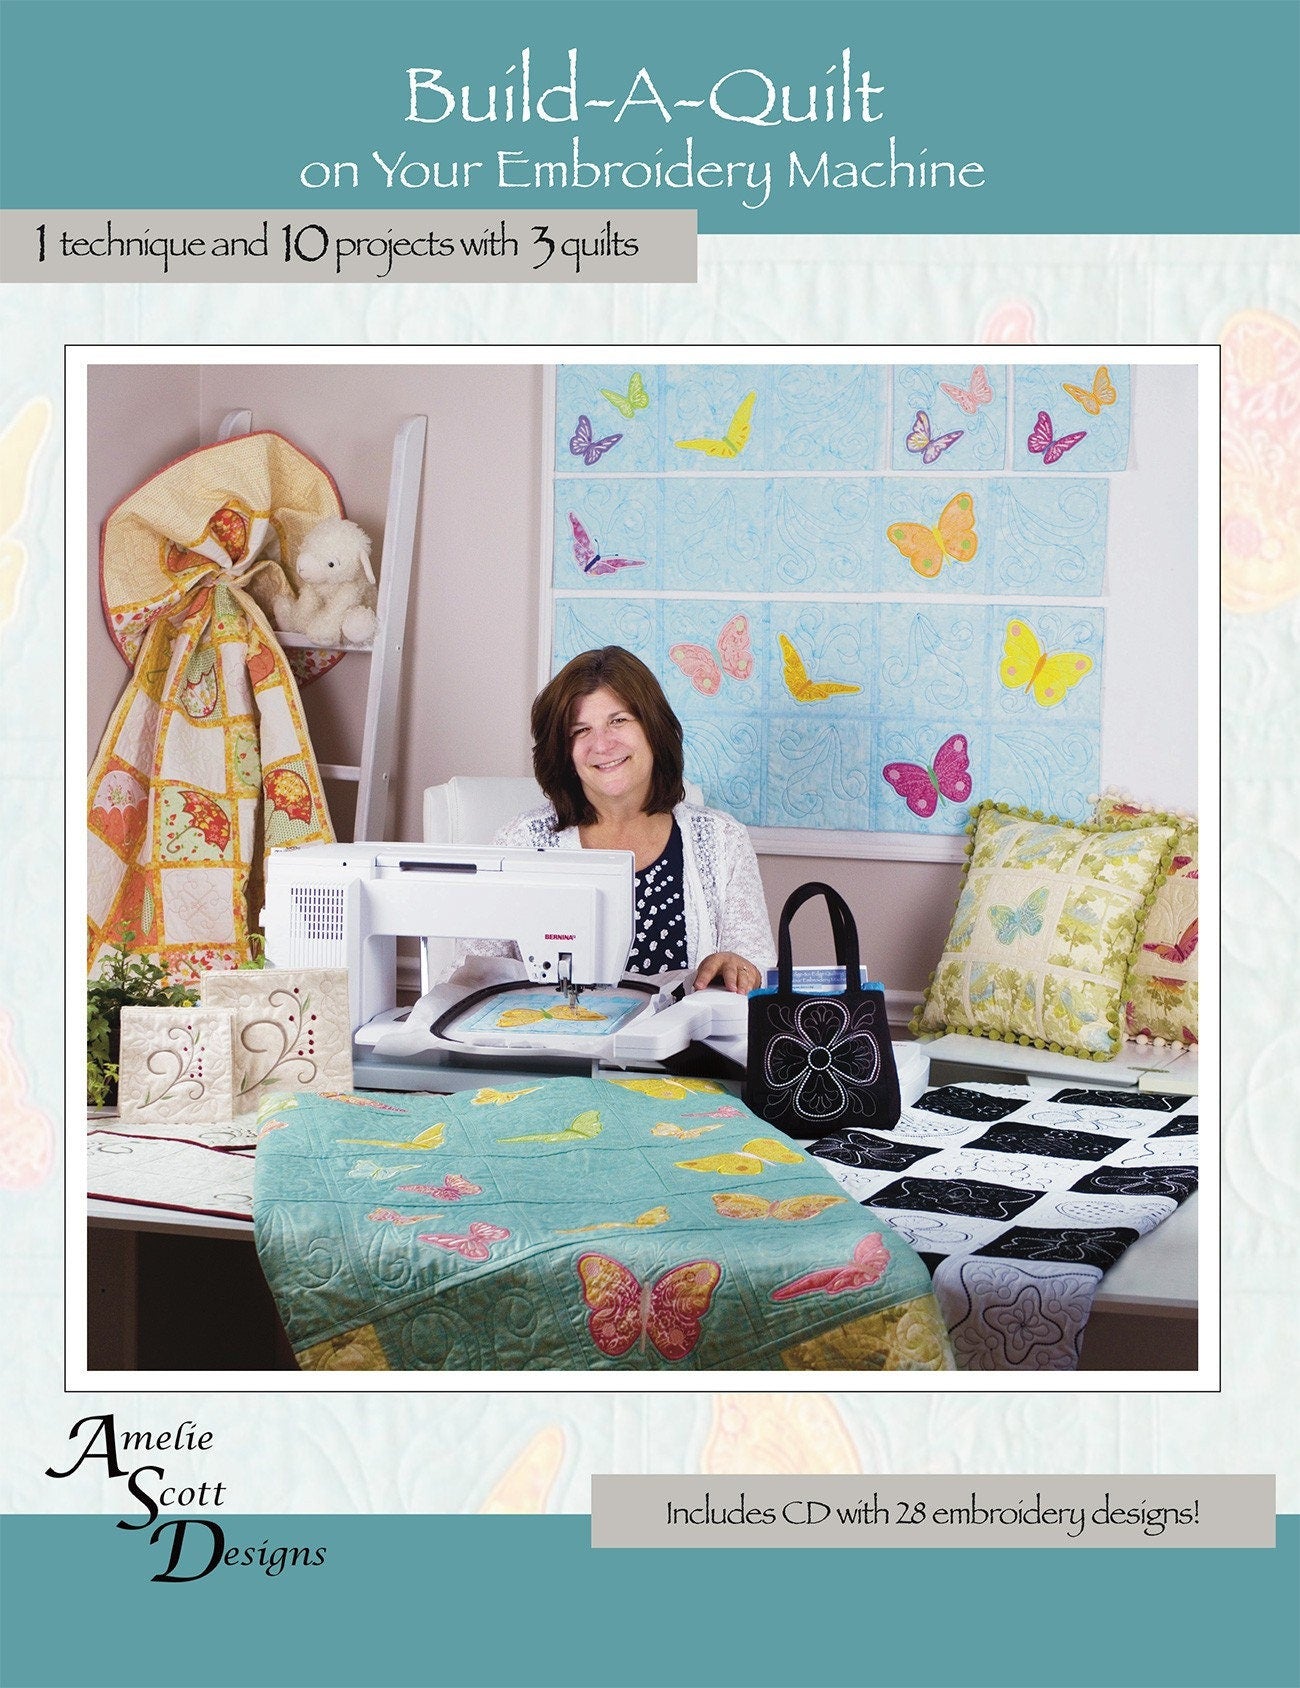 Build-A-Quilt On Your Embroidery Machine by Amelie Scott